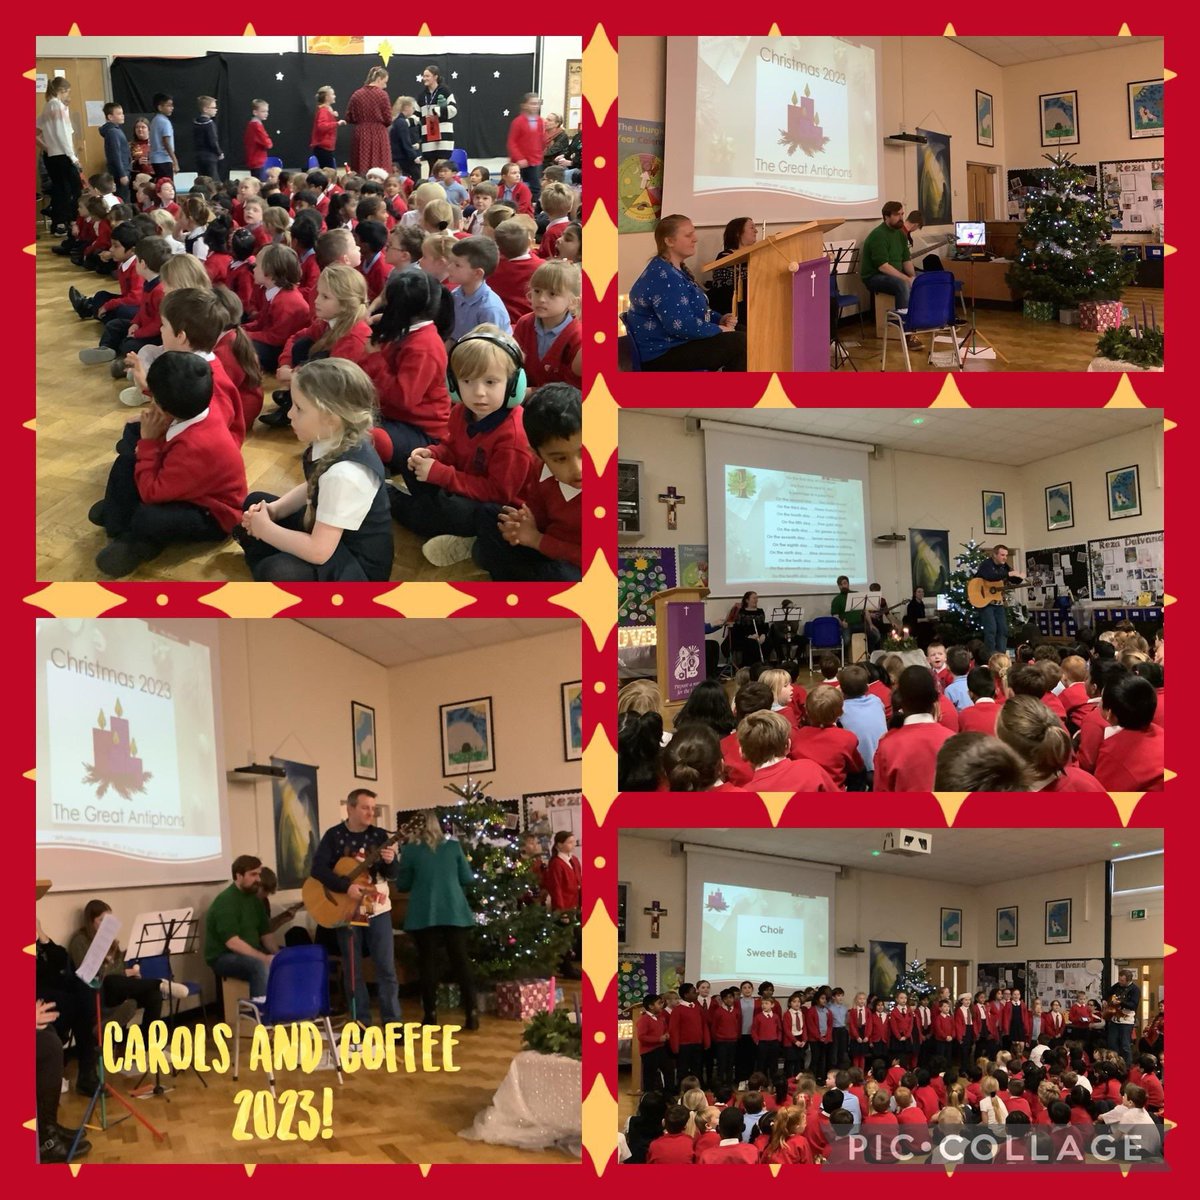 Thank you to everyone who came to Carols and Coffee and took part. It was a lovely way to end 2023 with the school family. We would like to take this opportunity to wish you all a very Merry Christmas and Happy New Year! We will see you all back here in 2024.#FestiveCheer